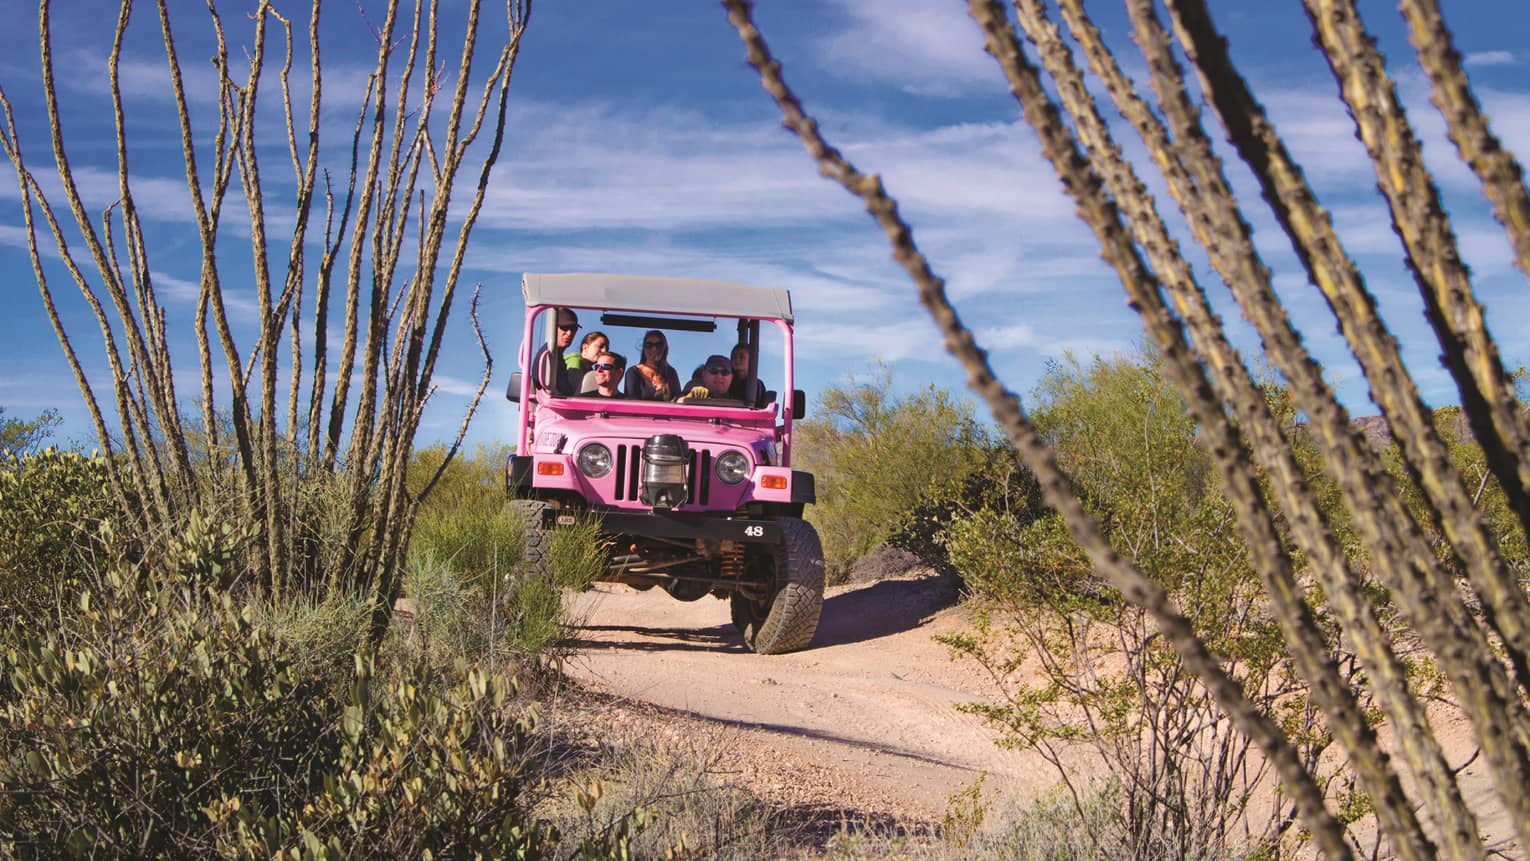 Pink Jeep with tourists drives down desert road past shrubs, cacti